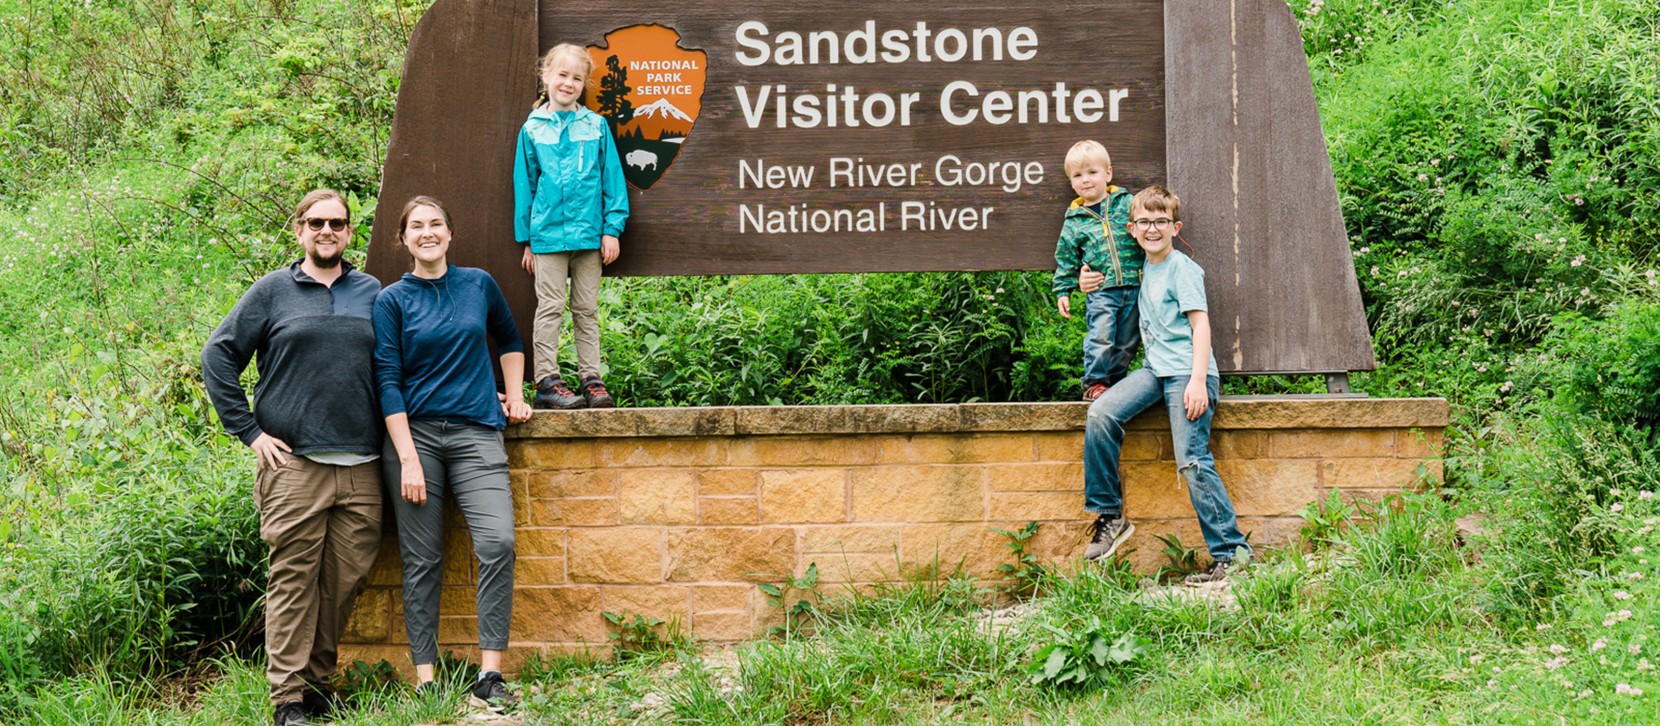 The Bowman family standing on and around the Sandstone Visitor Center sign.